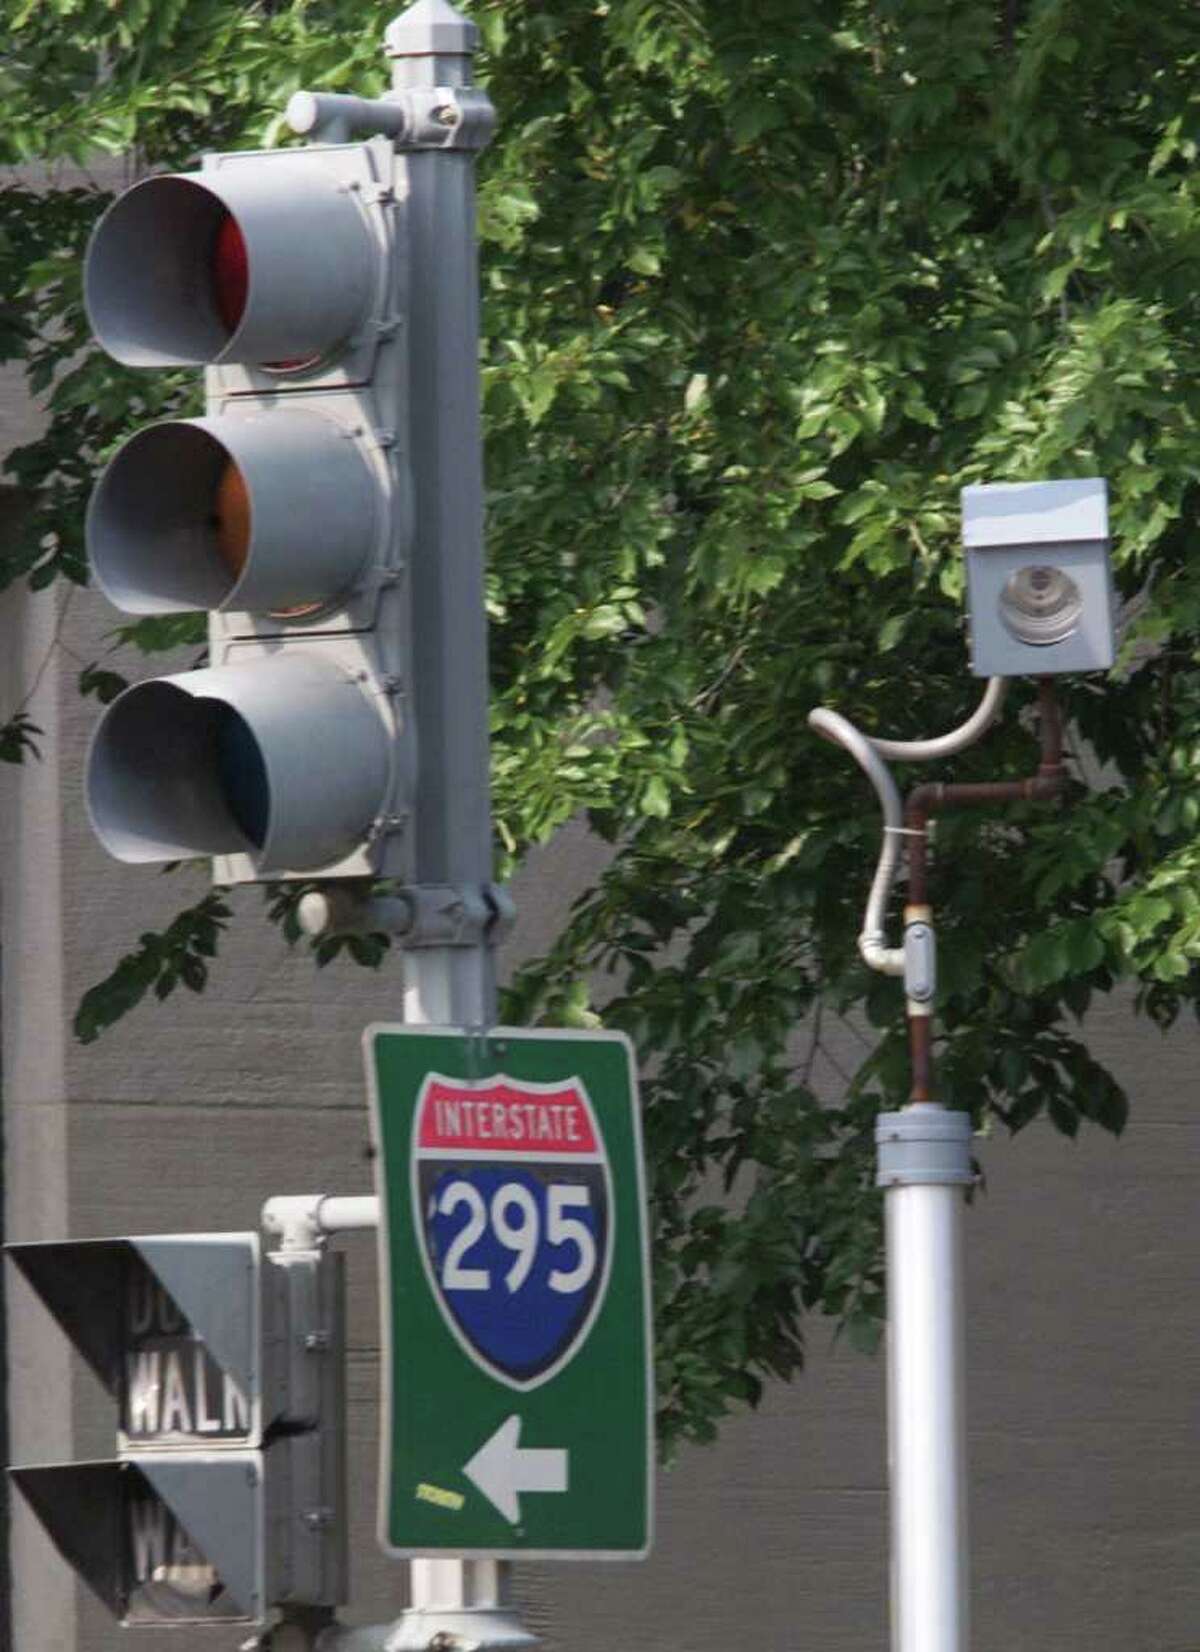 A camera is placed near a traffic light for drivers who run red lights on Constitution Avenue August 31, 2001 in Washington, DC. Connecticut legislators are considering enabling municipalities to use the cameras, but there is conflicting evidence on whether they actually improve safety. (Photo by Mark Wilson/Getty Images)